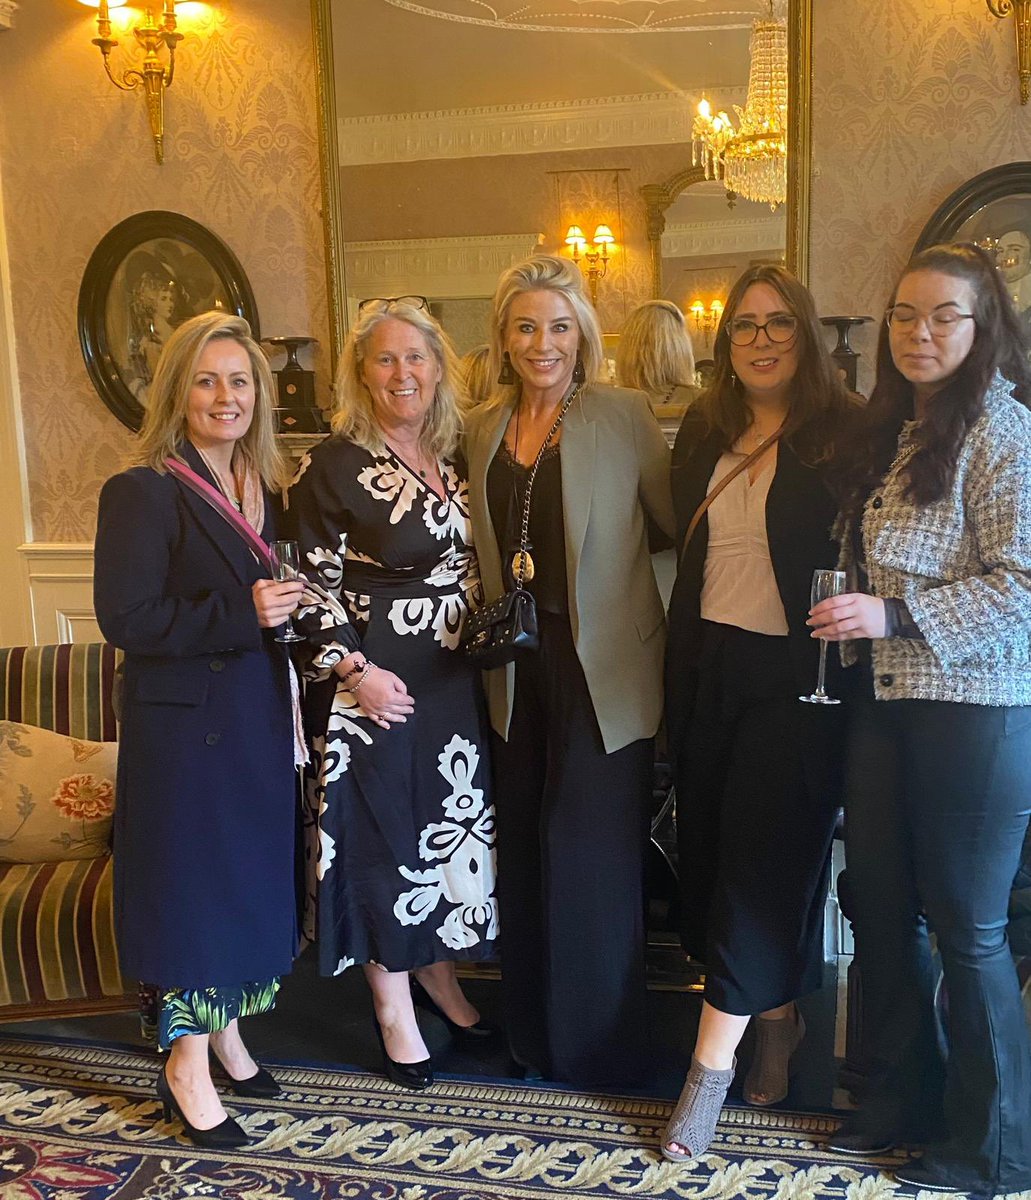 It was a pleasure to host these fantastic ladies from @ExcursionsIrl tours. Safe travels from us all at The Maryborough #tours #travels #Cork #hotel